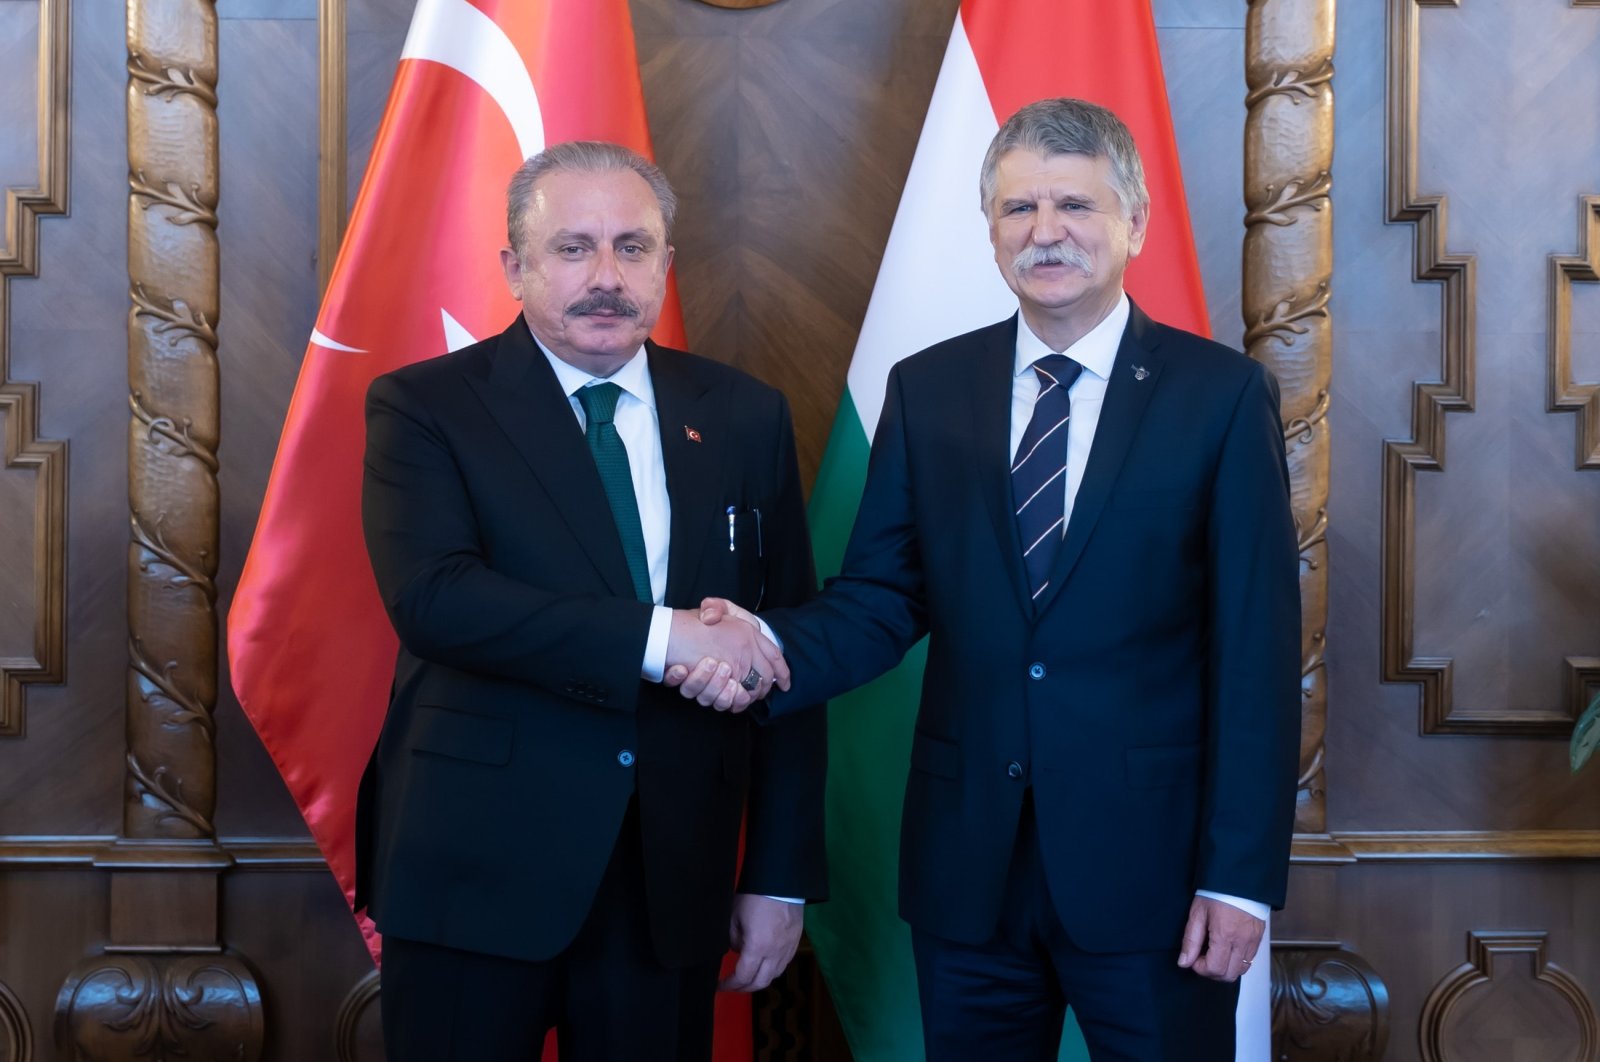 Turkish Parliament Speaker Mustafa Şentop (L) meets with his Hungarian counterpart Laszlo Köver (R) in Budapest, Hungary, Sept. 29, 2022. (DHA Photo)